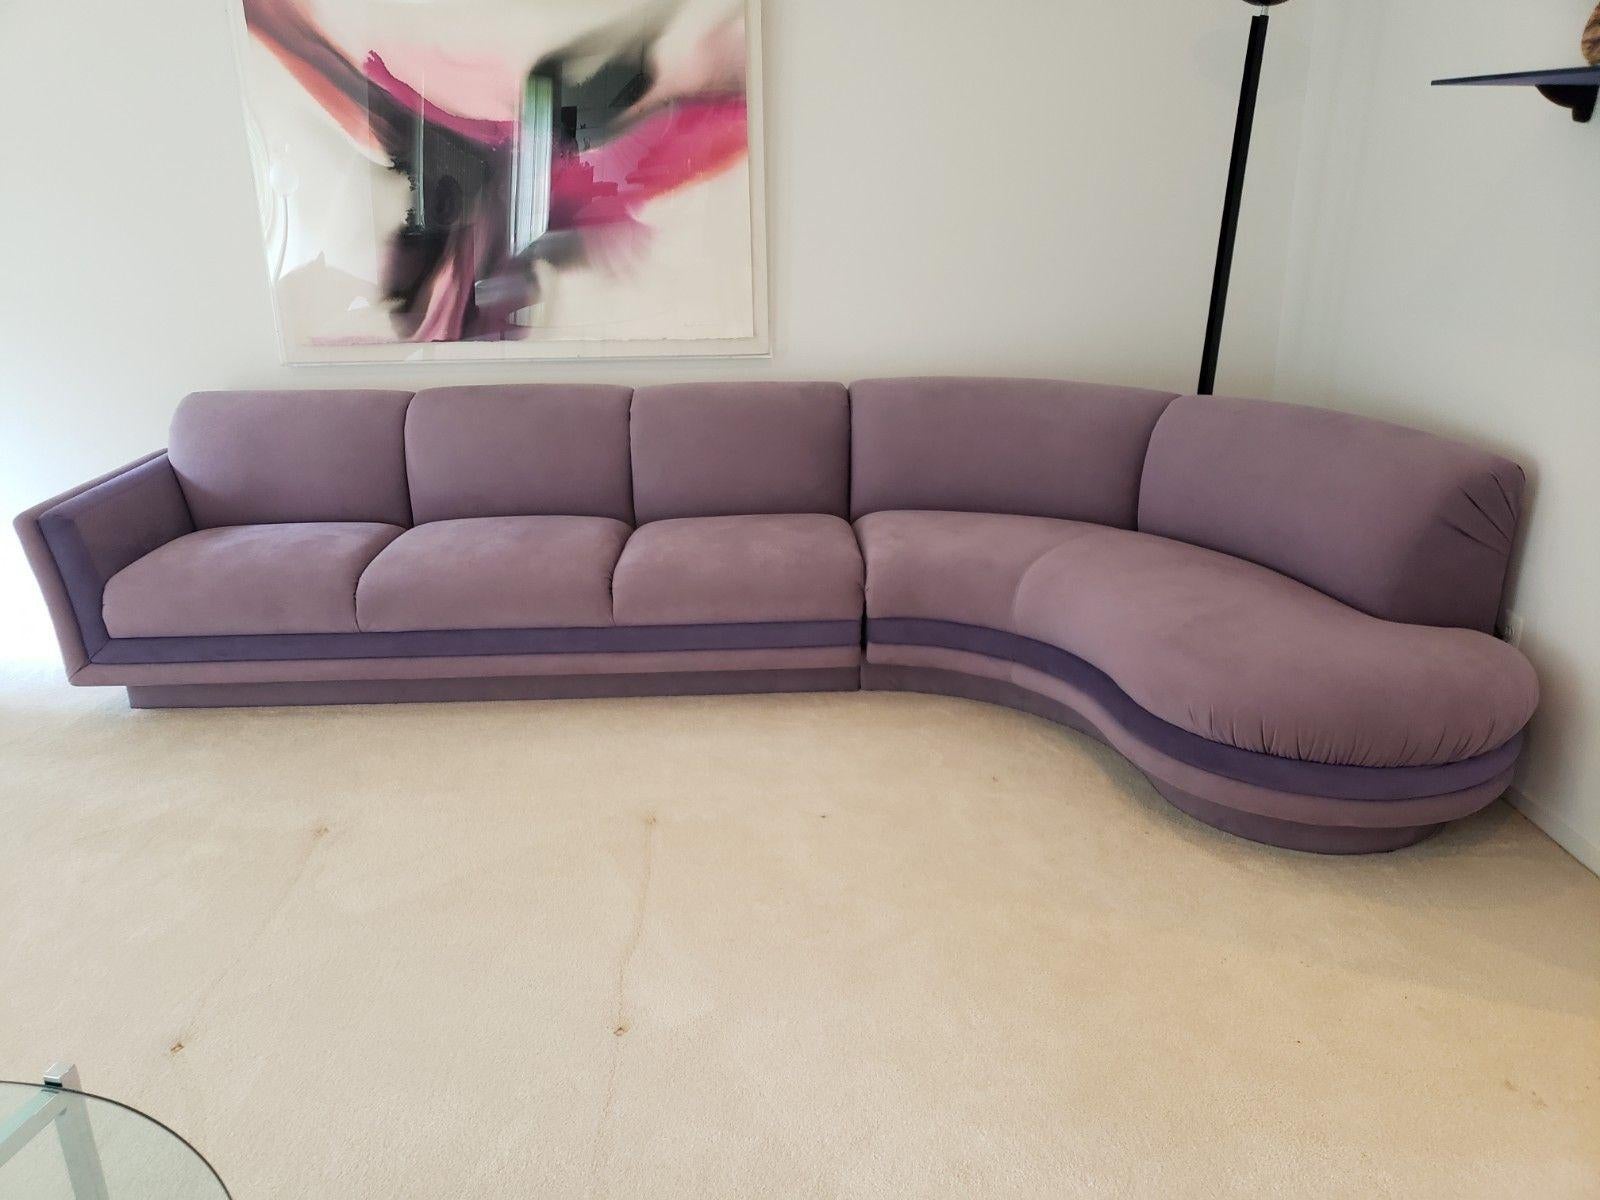 For your consideration is an amazing purple two piece microsuede 1980s sectional by Vladimir Kagan for Weiman. In very good condition on a floating platform base.
Dimensions: 141